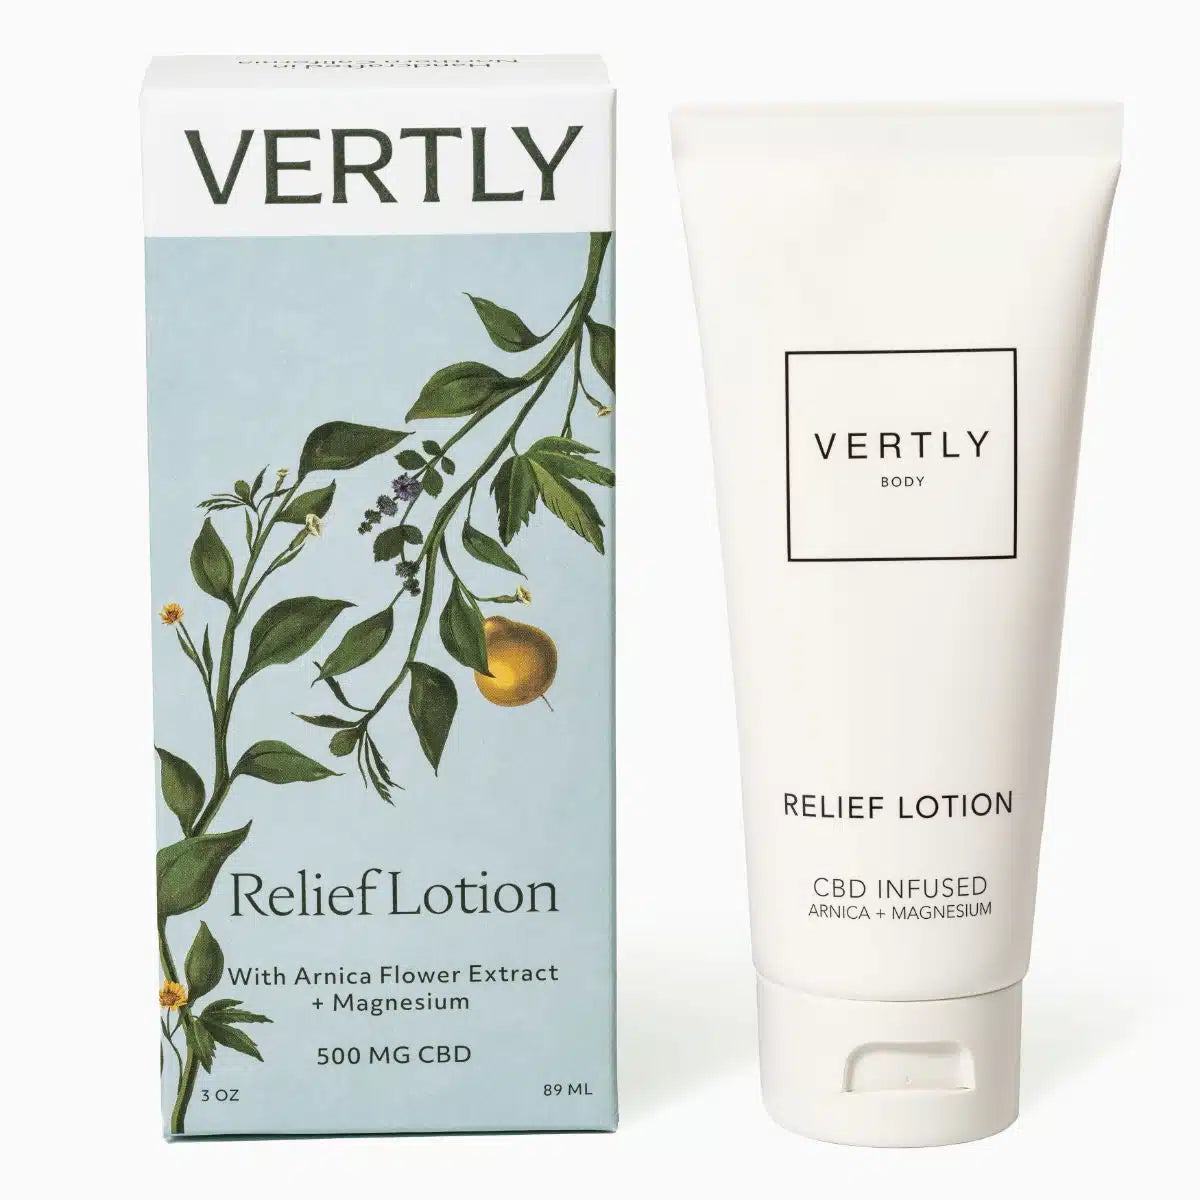 CBD Infused Relief Lotion - With Arnica Flower Extract + Magnesium